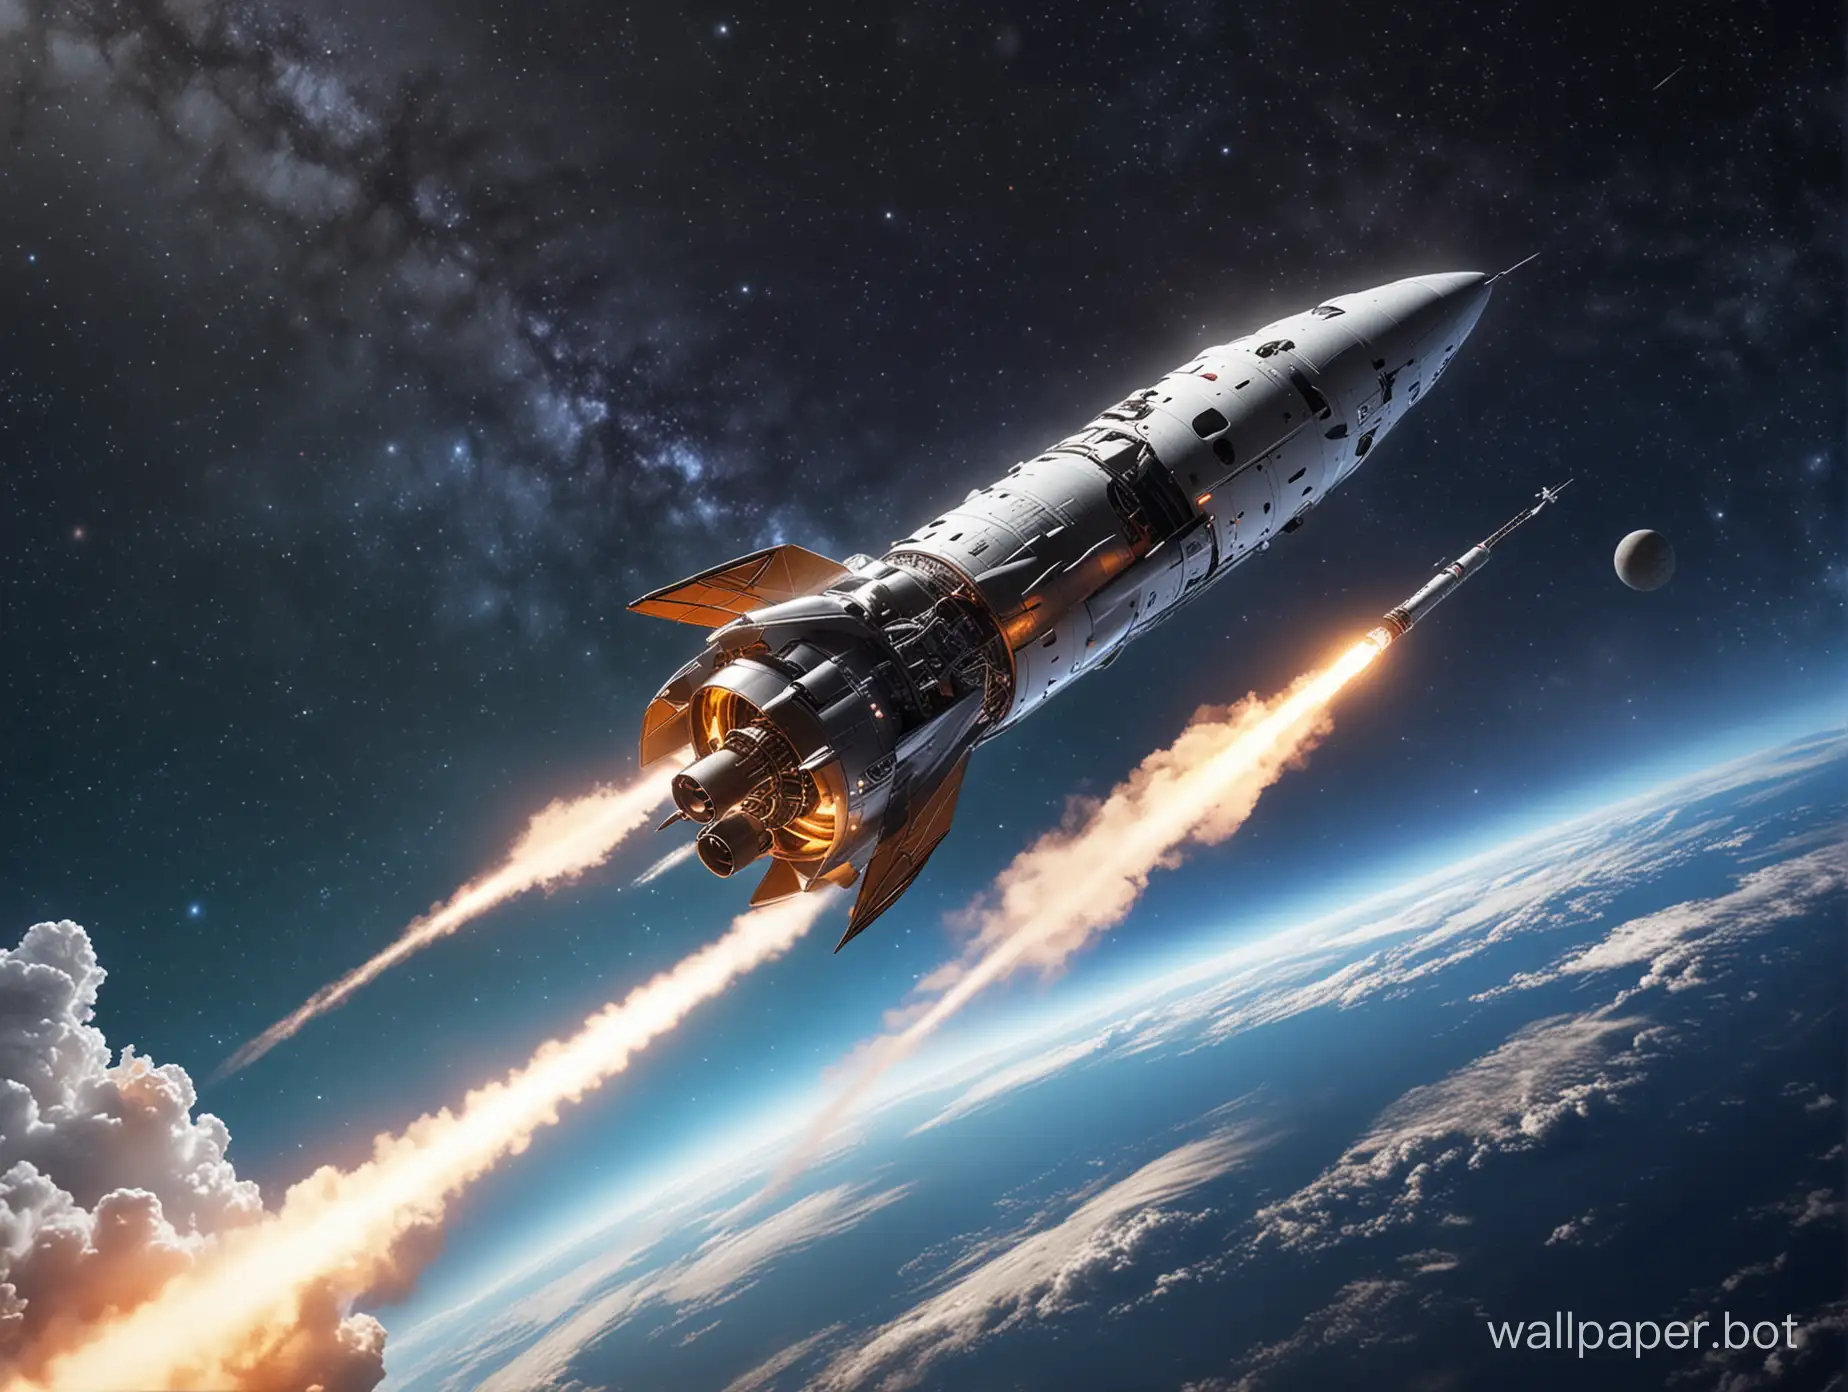 Futuristic-Wallpaper-Rocket-Satellite-and-AI-Fusion-for-Tech-Enthusiasts-and-Students